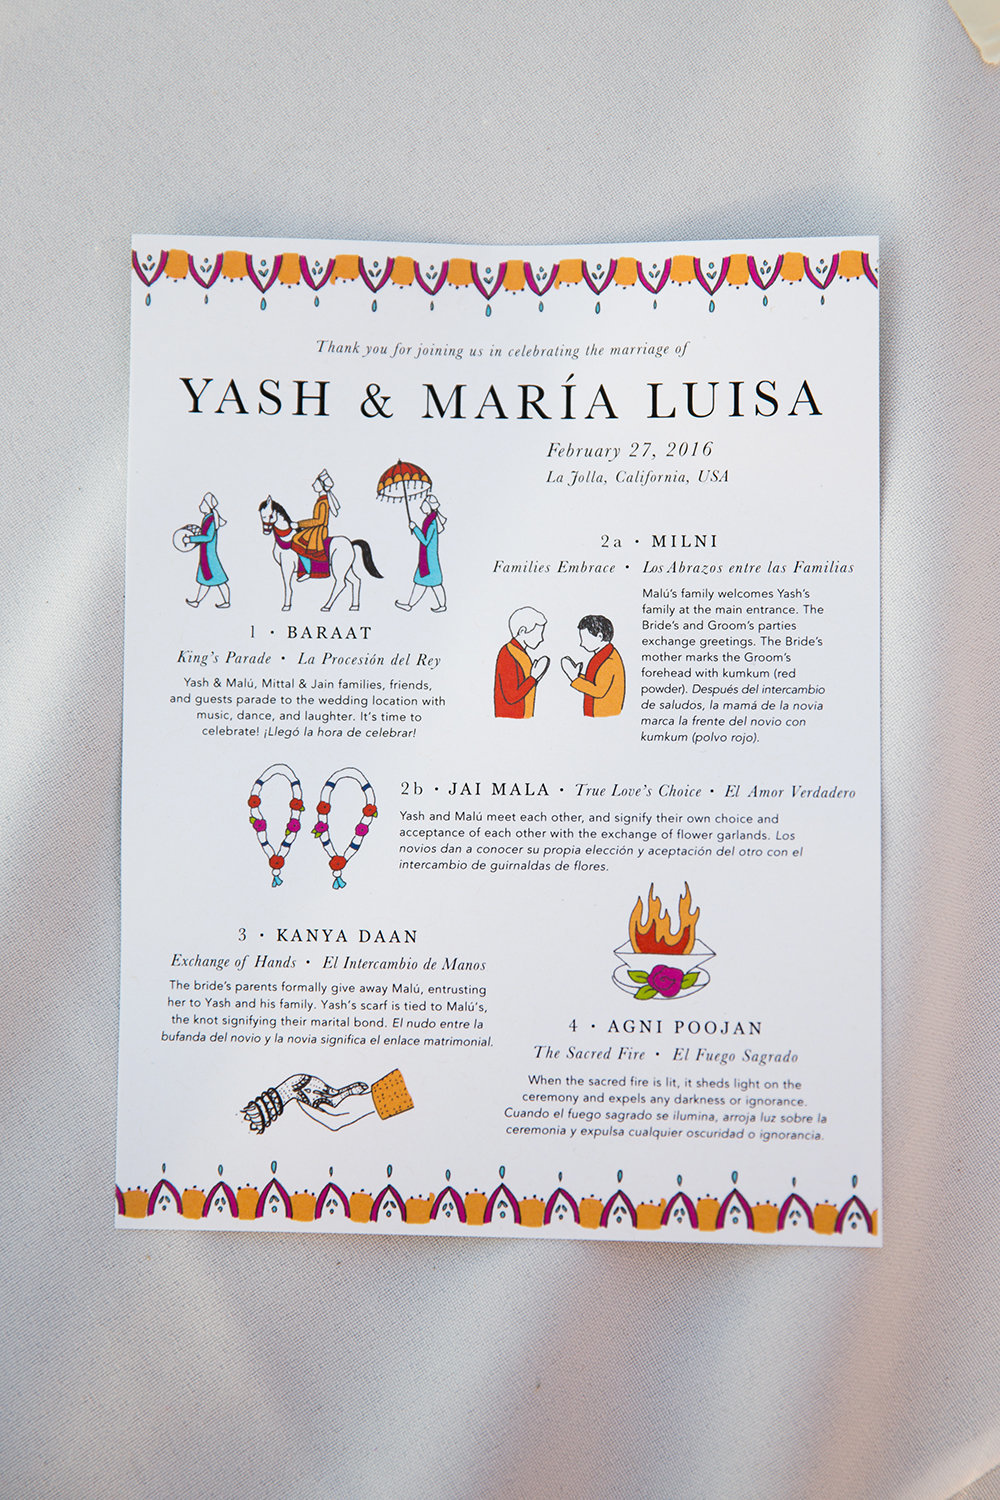 Cute wedding flyer explaining different parts of a Hindu Indian wedding ceremony